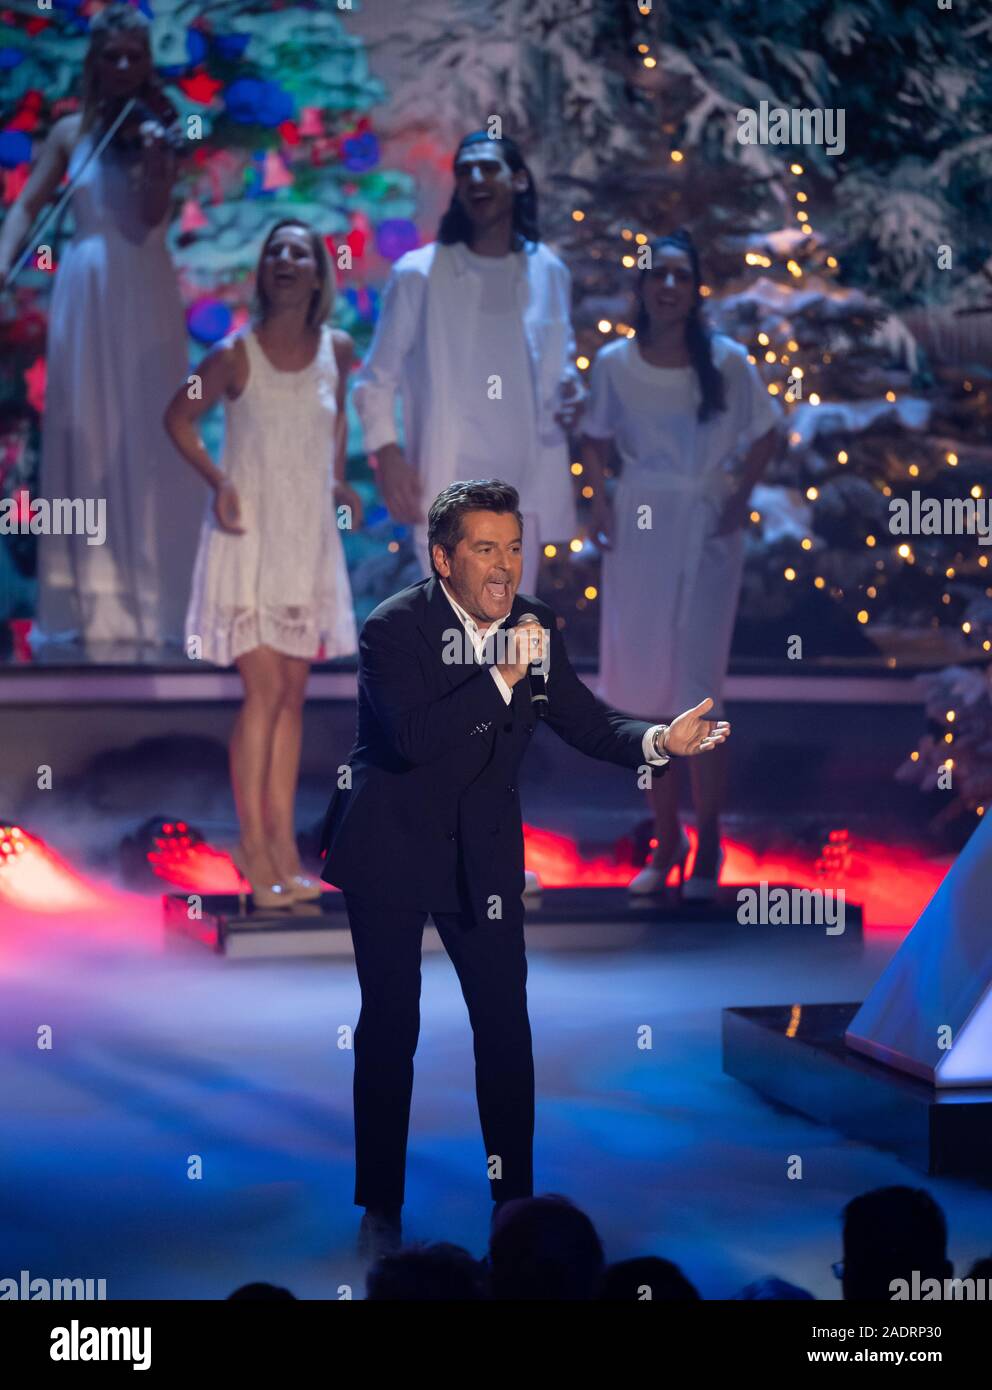 Munich, Germany. 04th Dec, 2019. Thomas Anders, singer, at the TV fundraiser gala 'The most beautiful Christmas hits'. The programme will be broadcast live on ZDF. Credit: Sven Hoppe/dpa/Alamy Live News Stock Photo